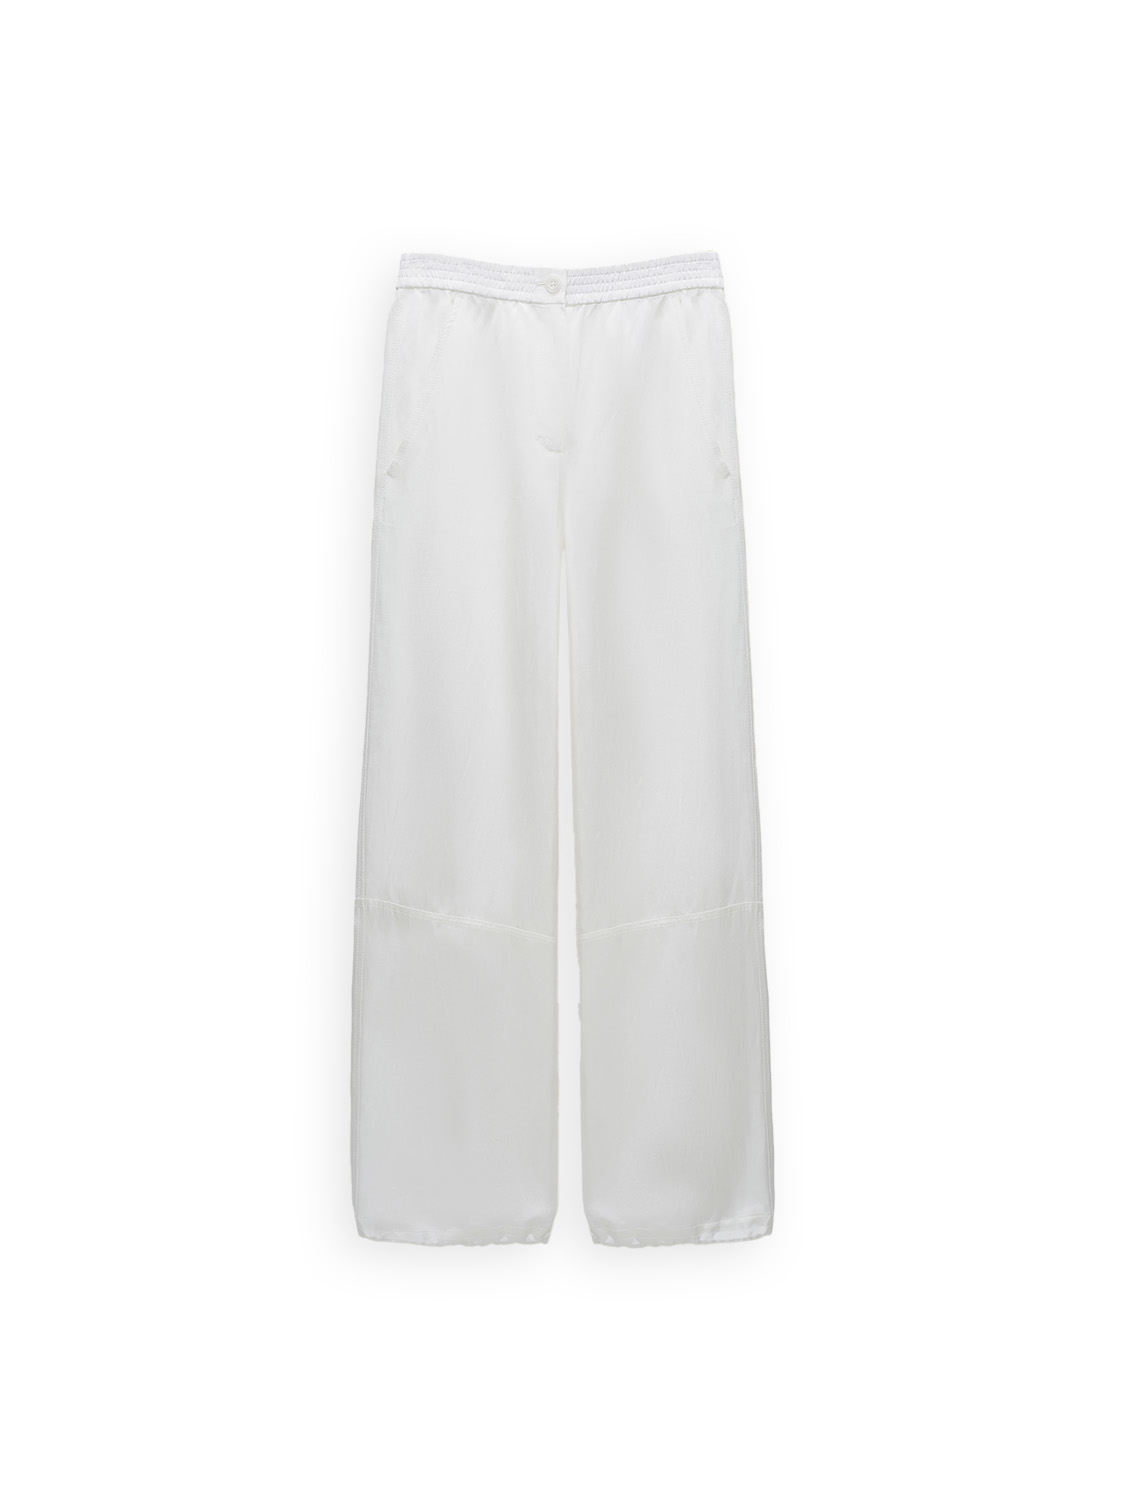 Dorothee Schumacher Slouchy coolness pants  blanco XS